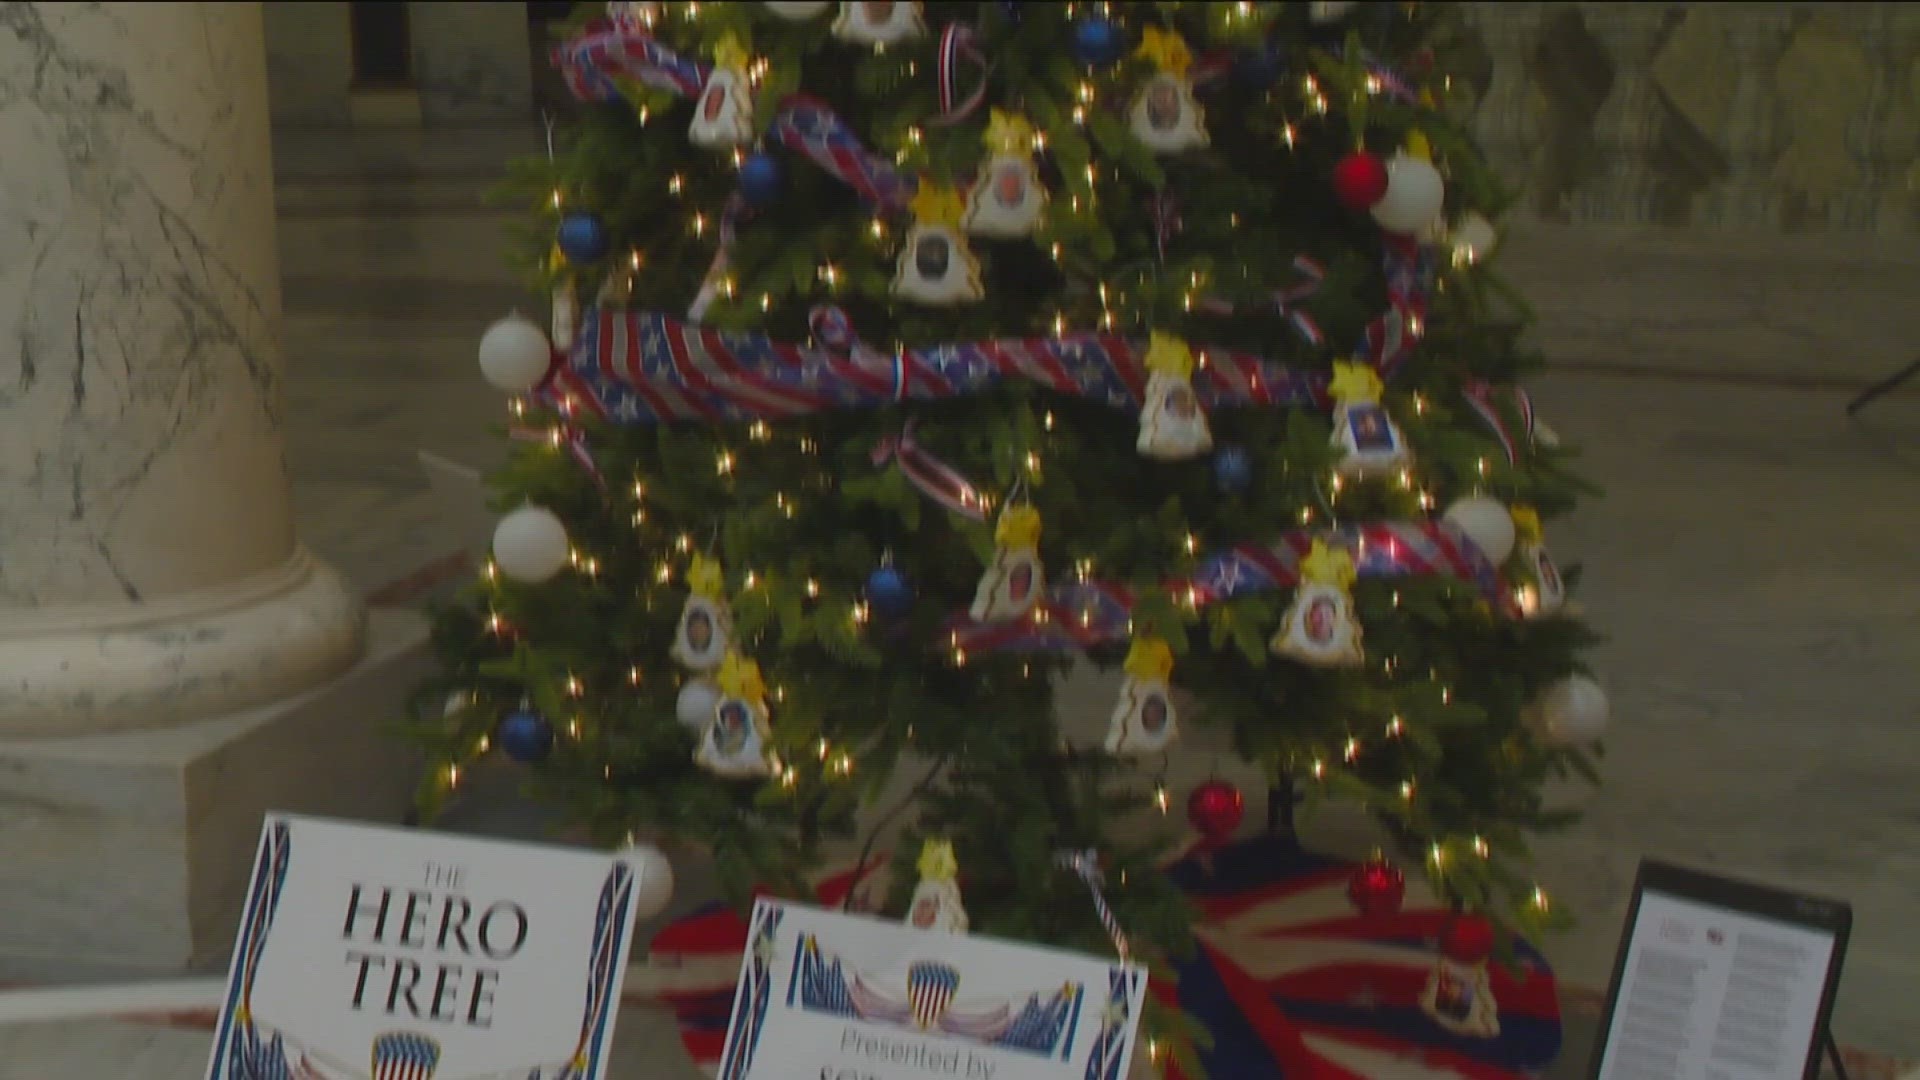 The 'Hero Tree' is adorned with ornaments to honor Idaho's fallen military heroes. It is located in the Idaho Capitol Rotunda by the Idaho Attorney General's Office.